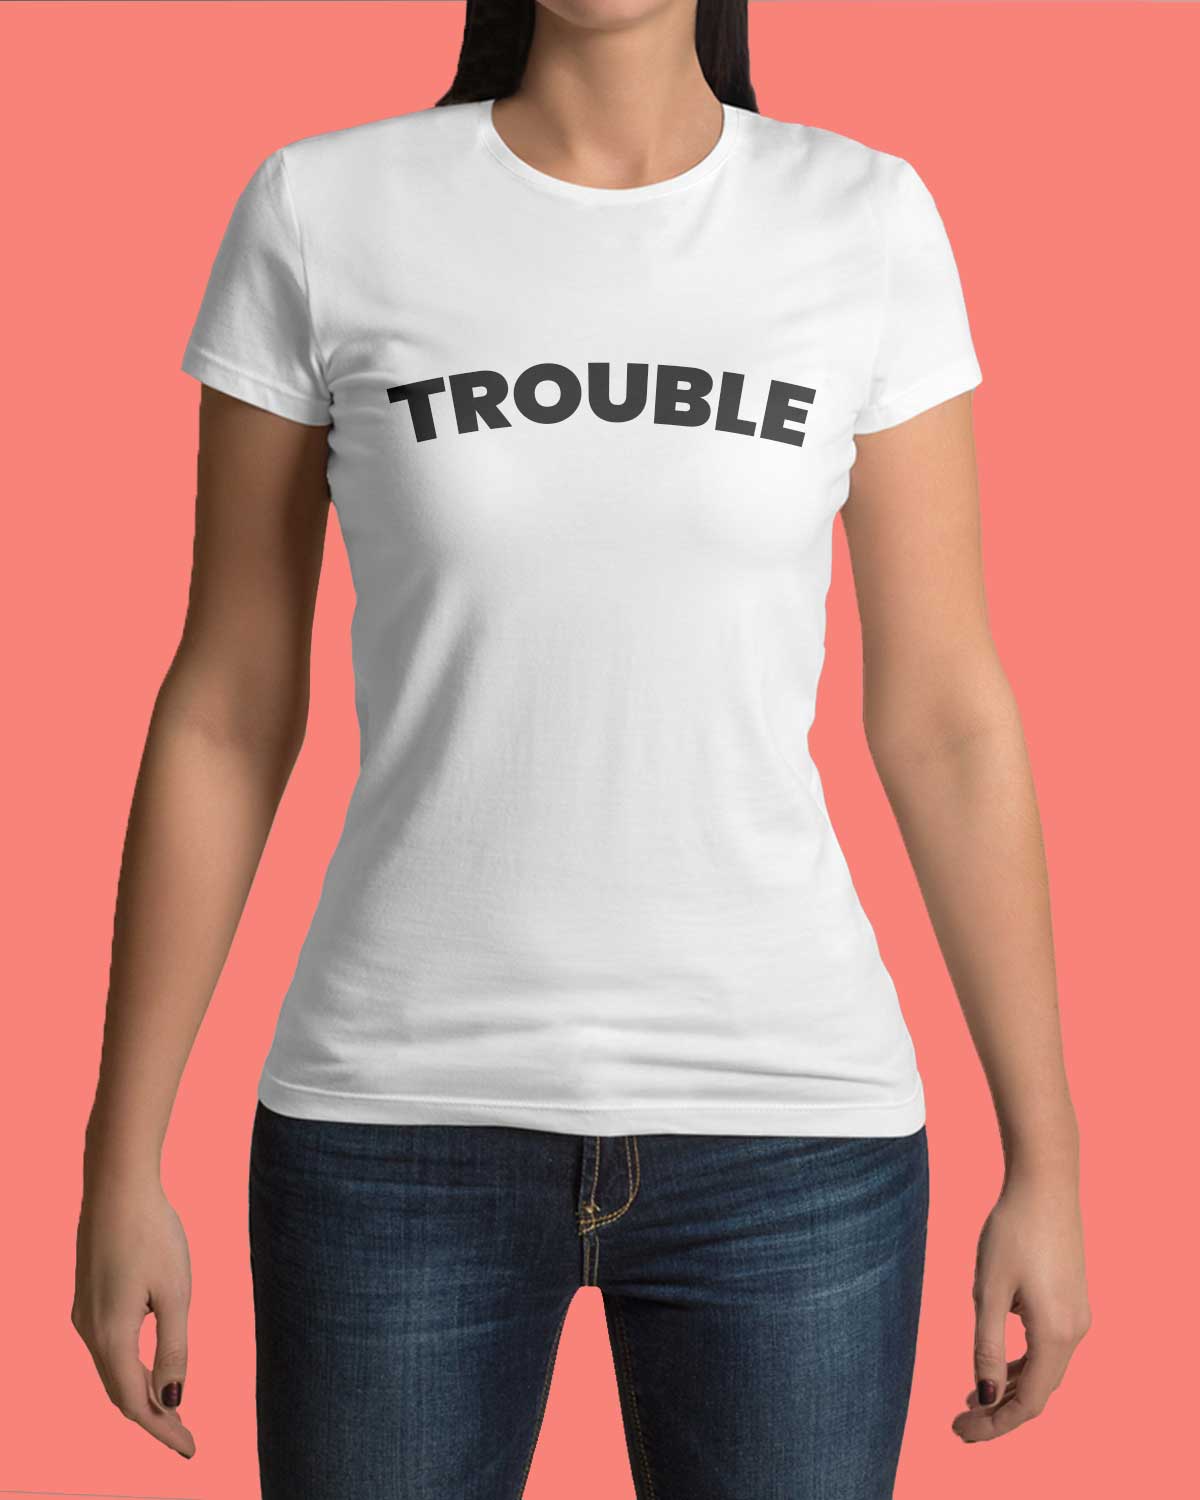 Trouble Round Neck Girls Top